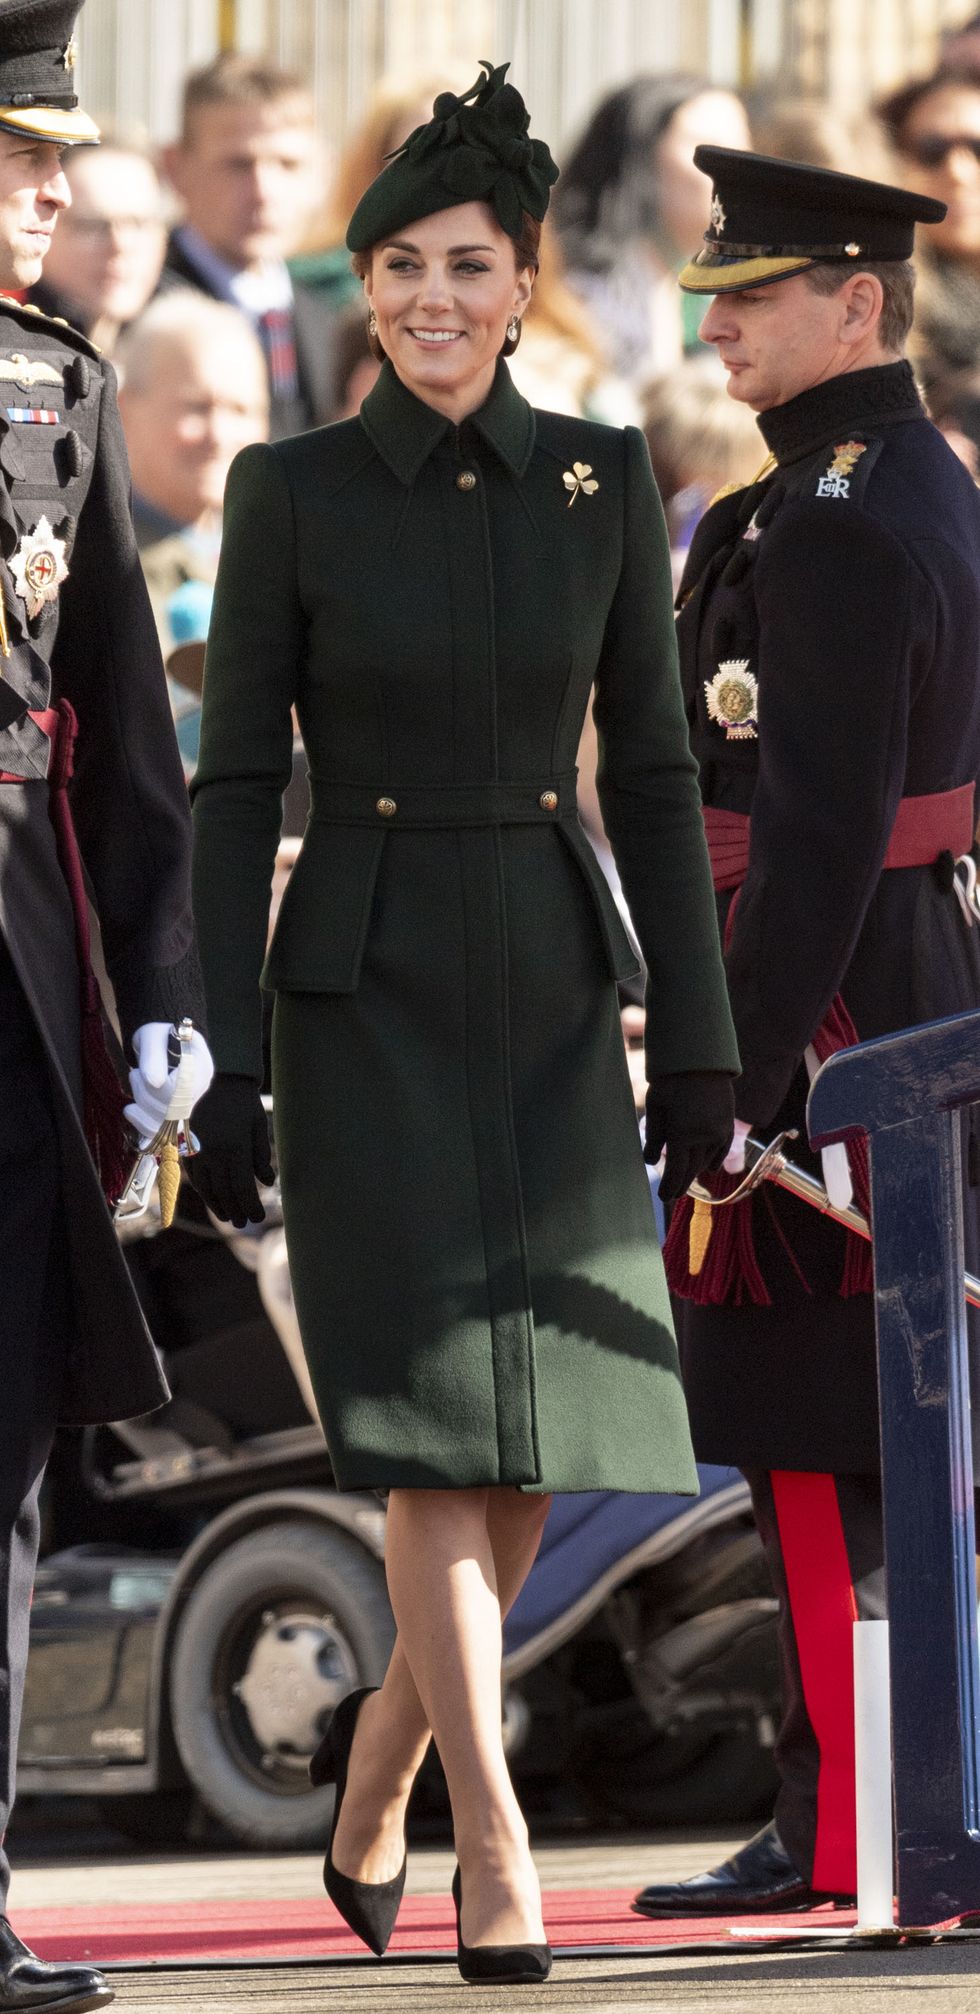 Kate Middleton Wears Chic Alexander McQueen Coat For Day With